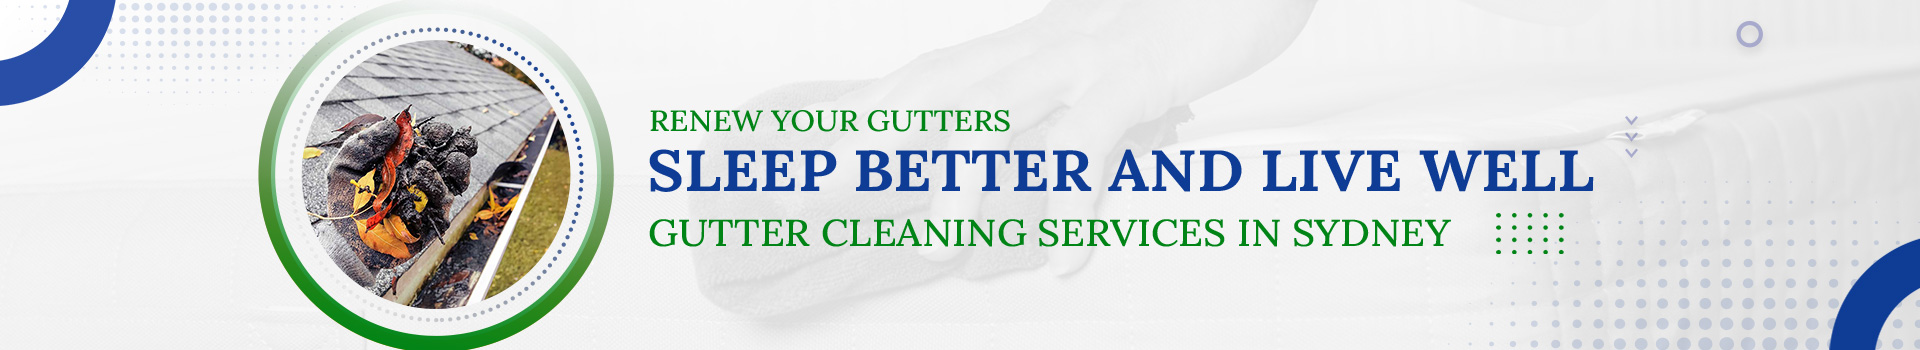 Gutter Cleaning services in Sydney